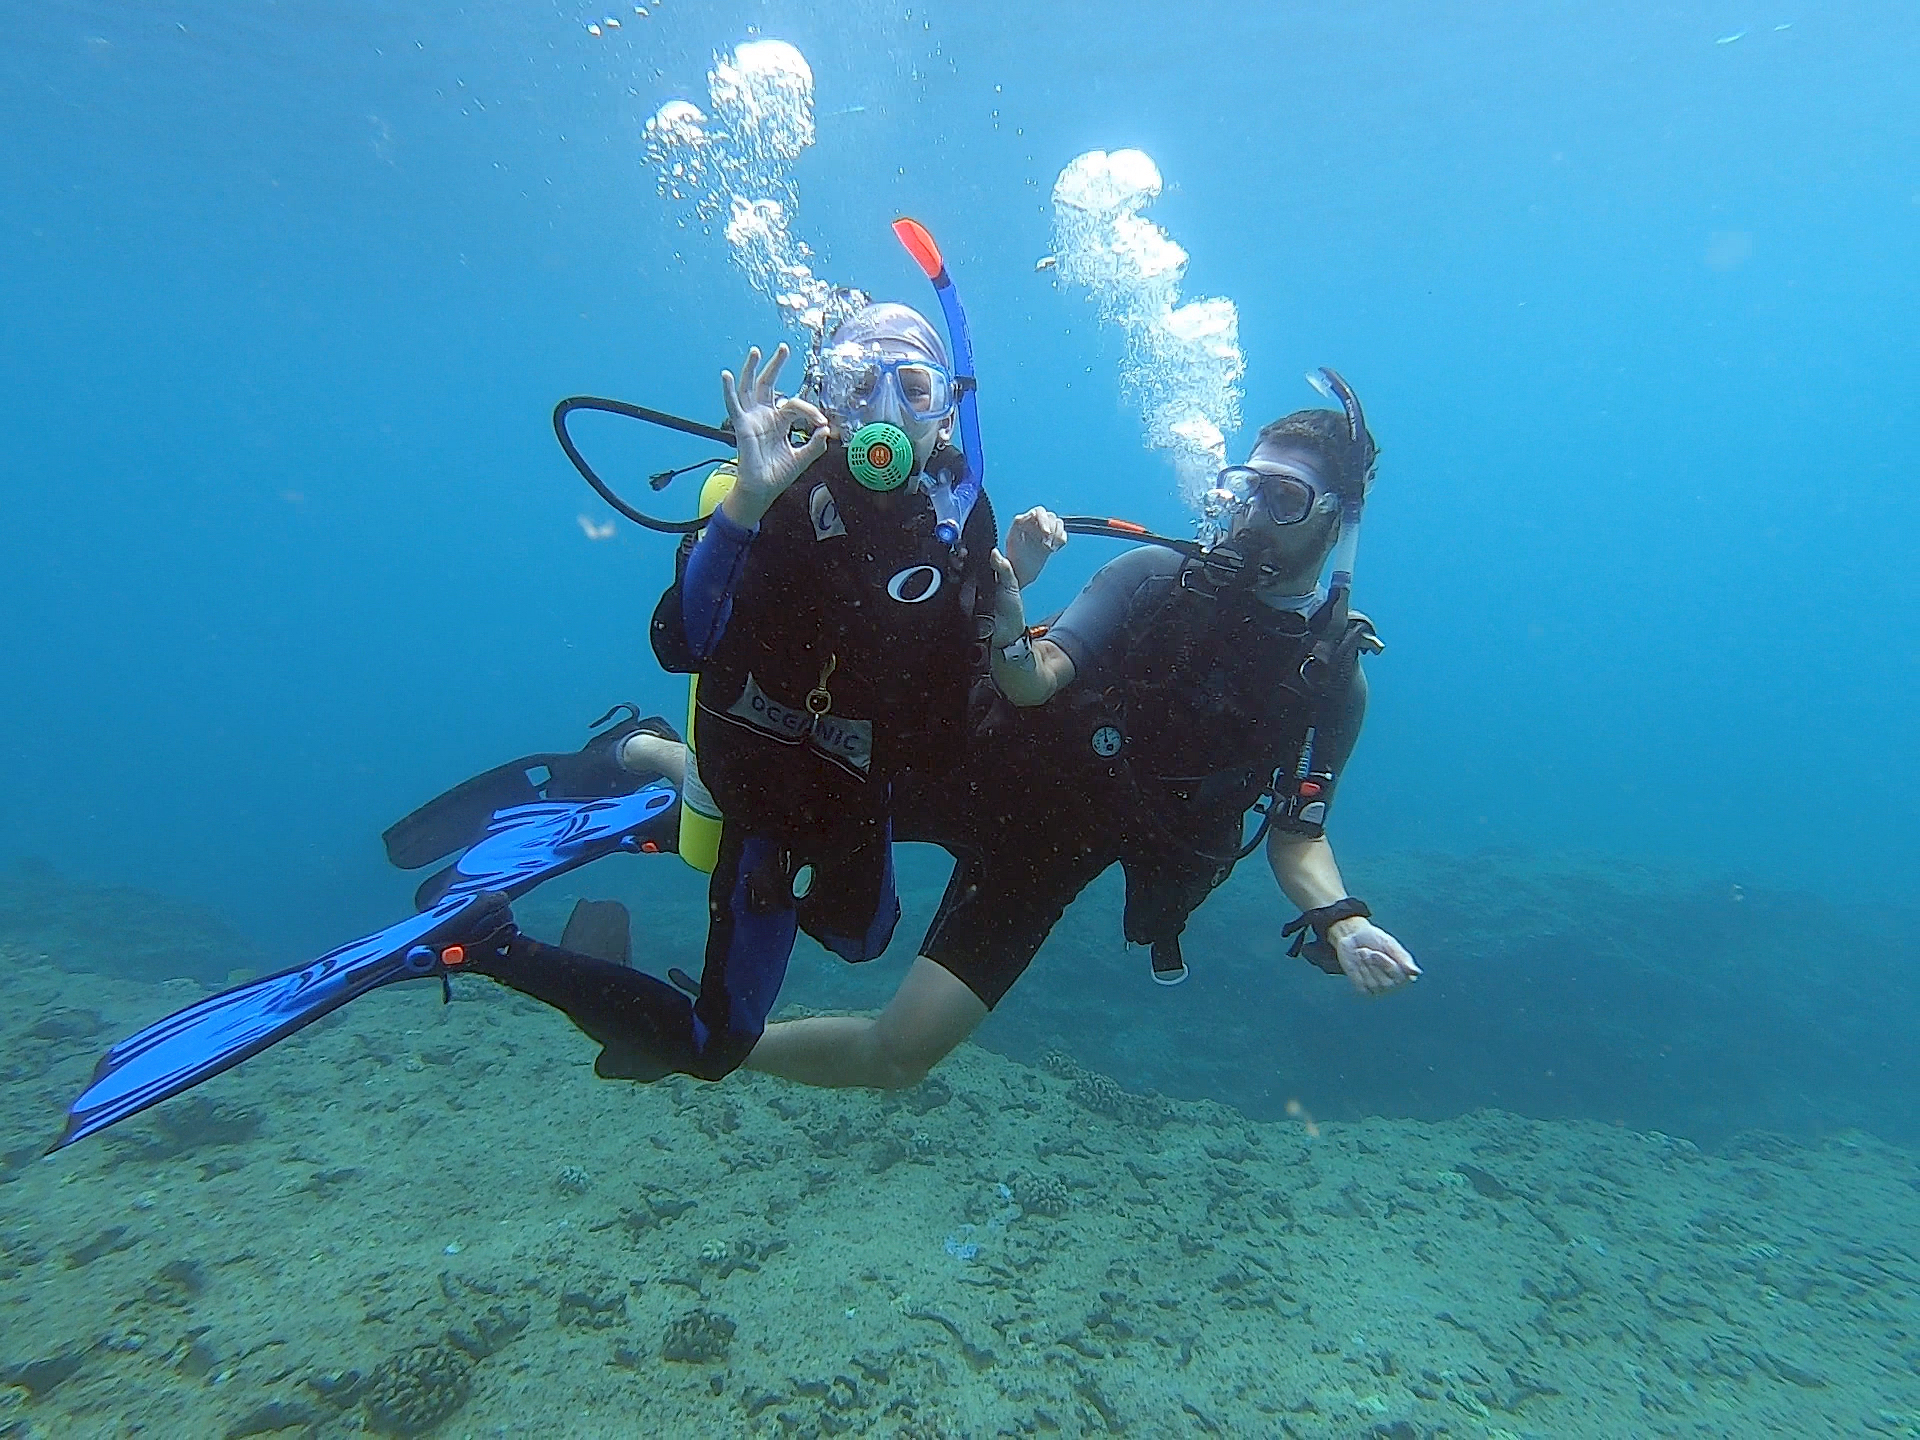 Try Scuba Diving with NO EXPERIENCE with the Discover Scuba Diving Experience in Oahu Hawaii